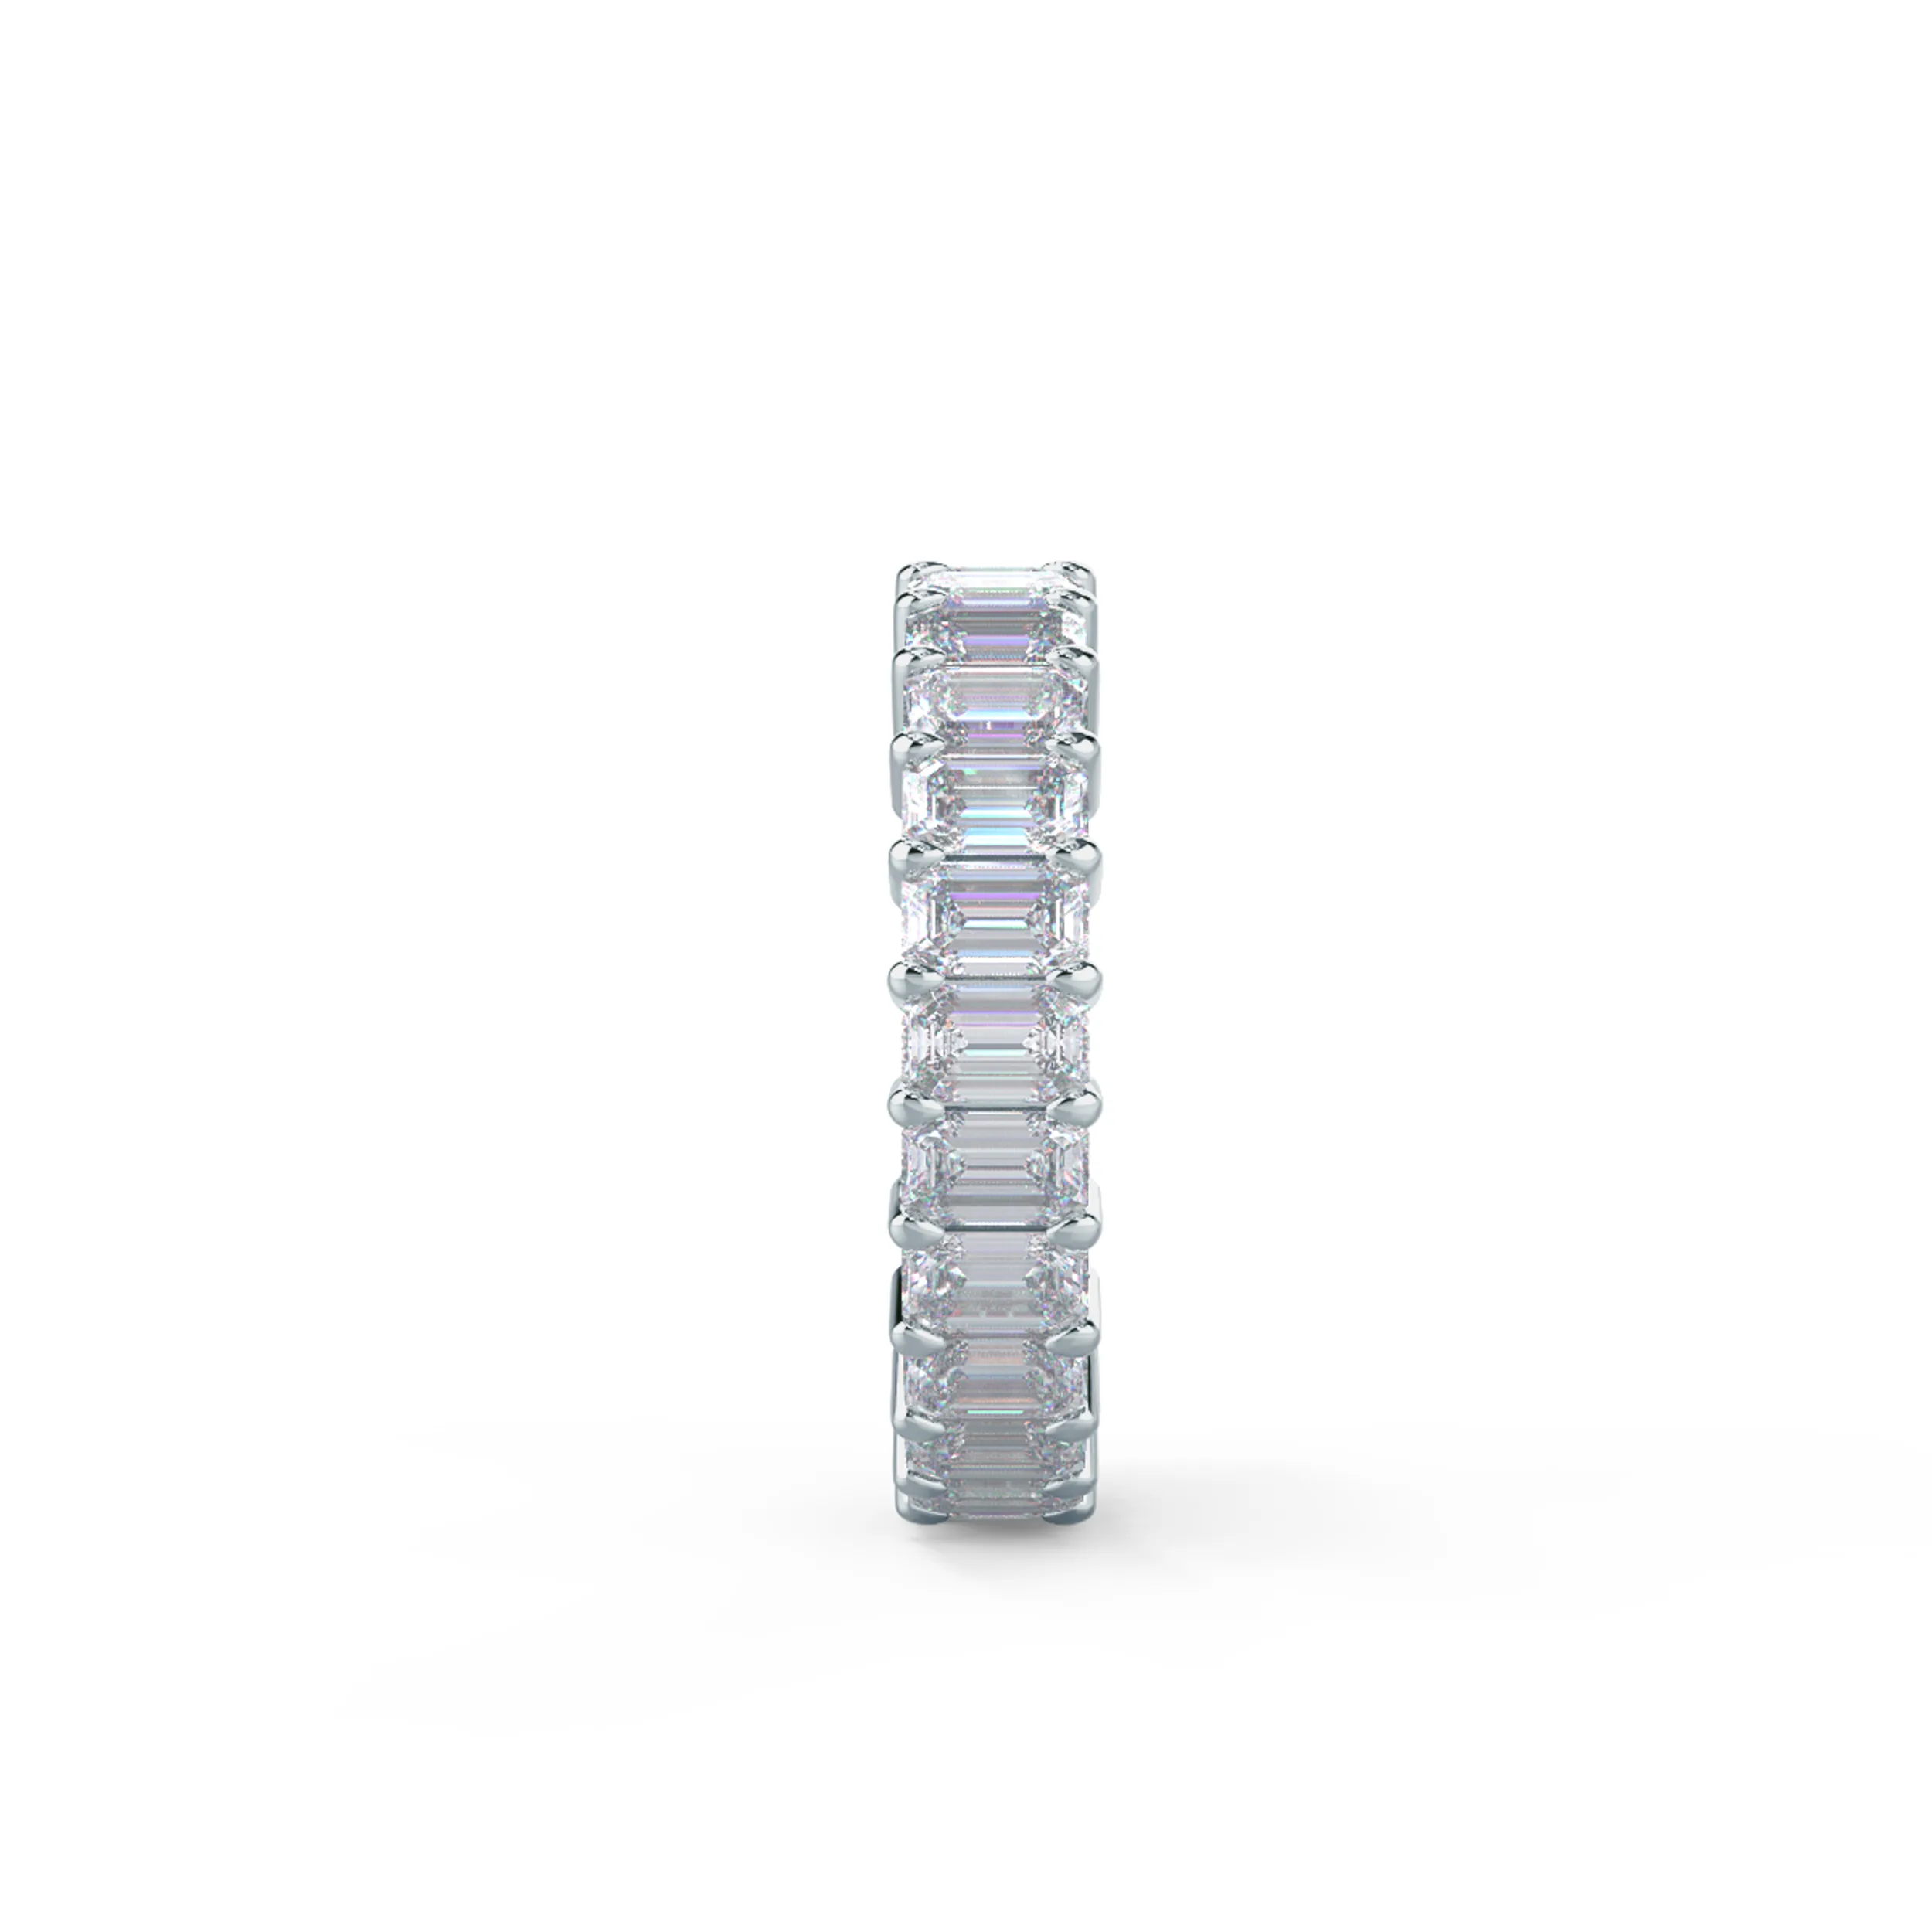 Exceptional Quality 5.0 ct Lab Created Diamonds Emerald Eternity Band in 18k White Gold (Side View)